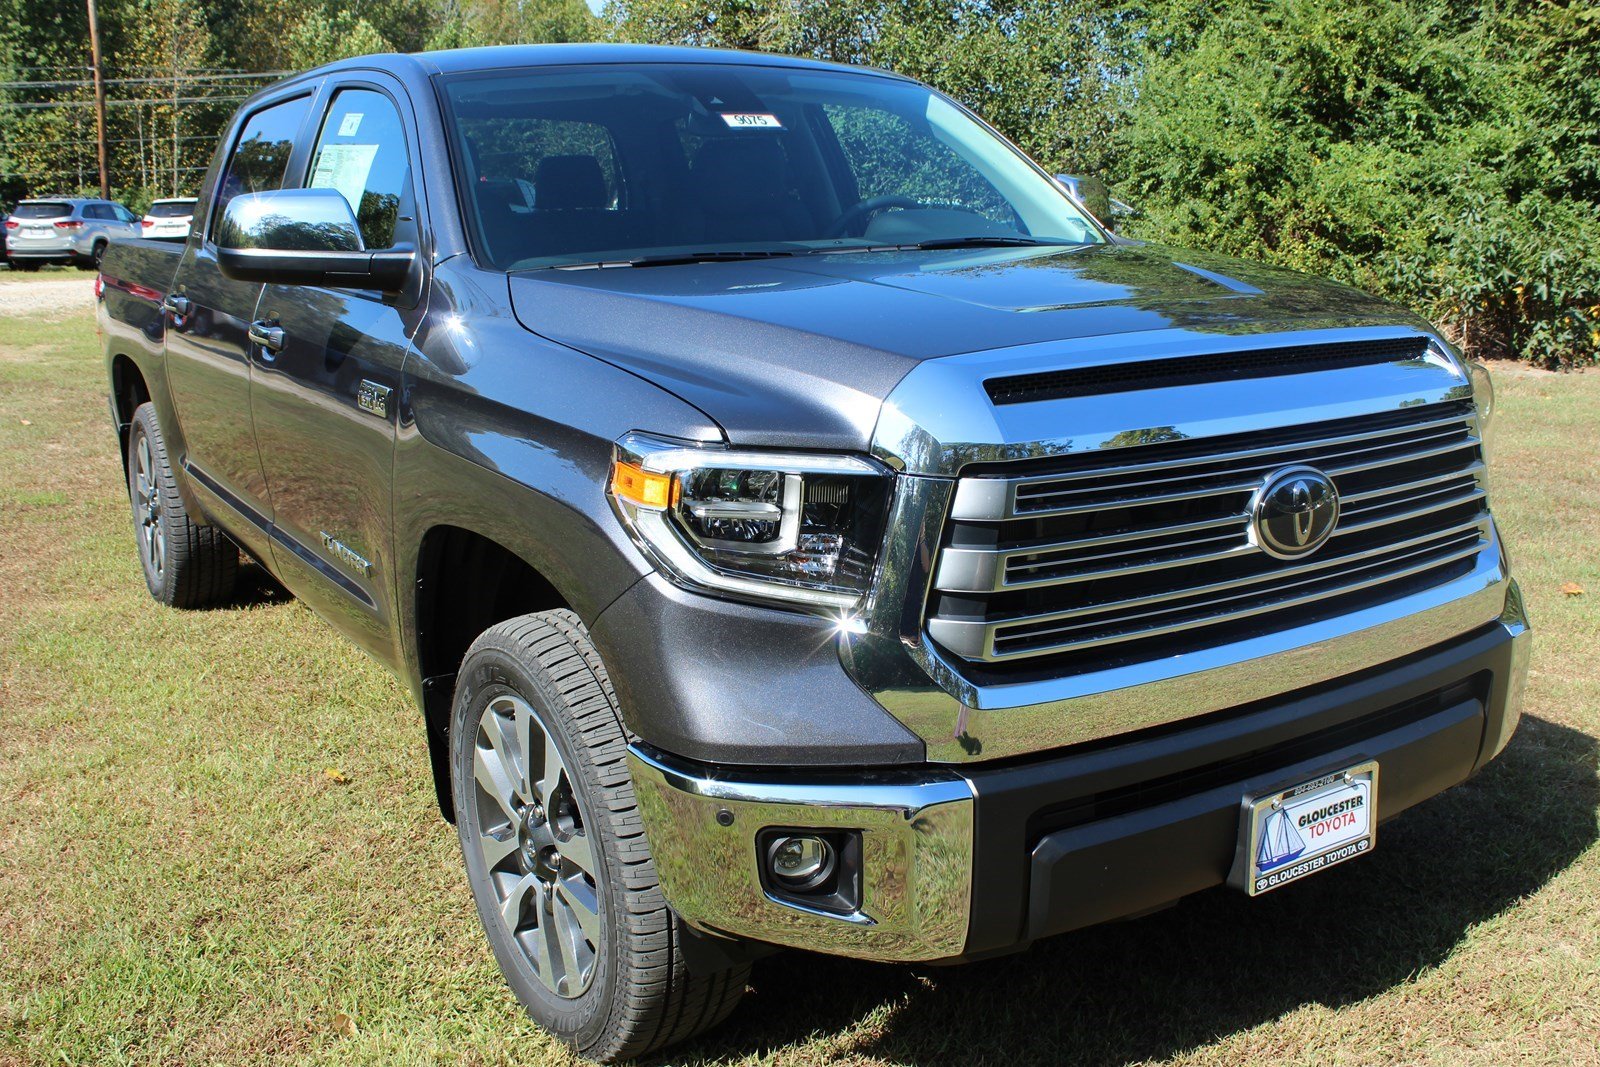 New 2020 Toyota Tundra 4WD Limited Crew Cab Pickup in Gloucester #9075